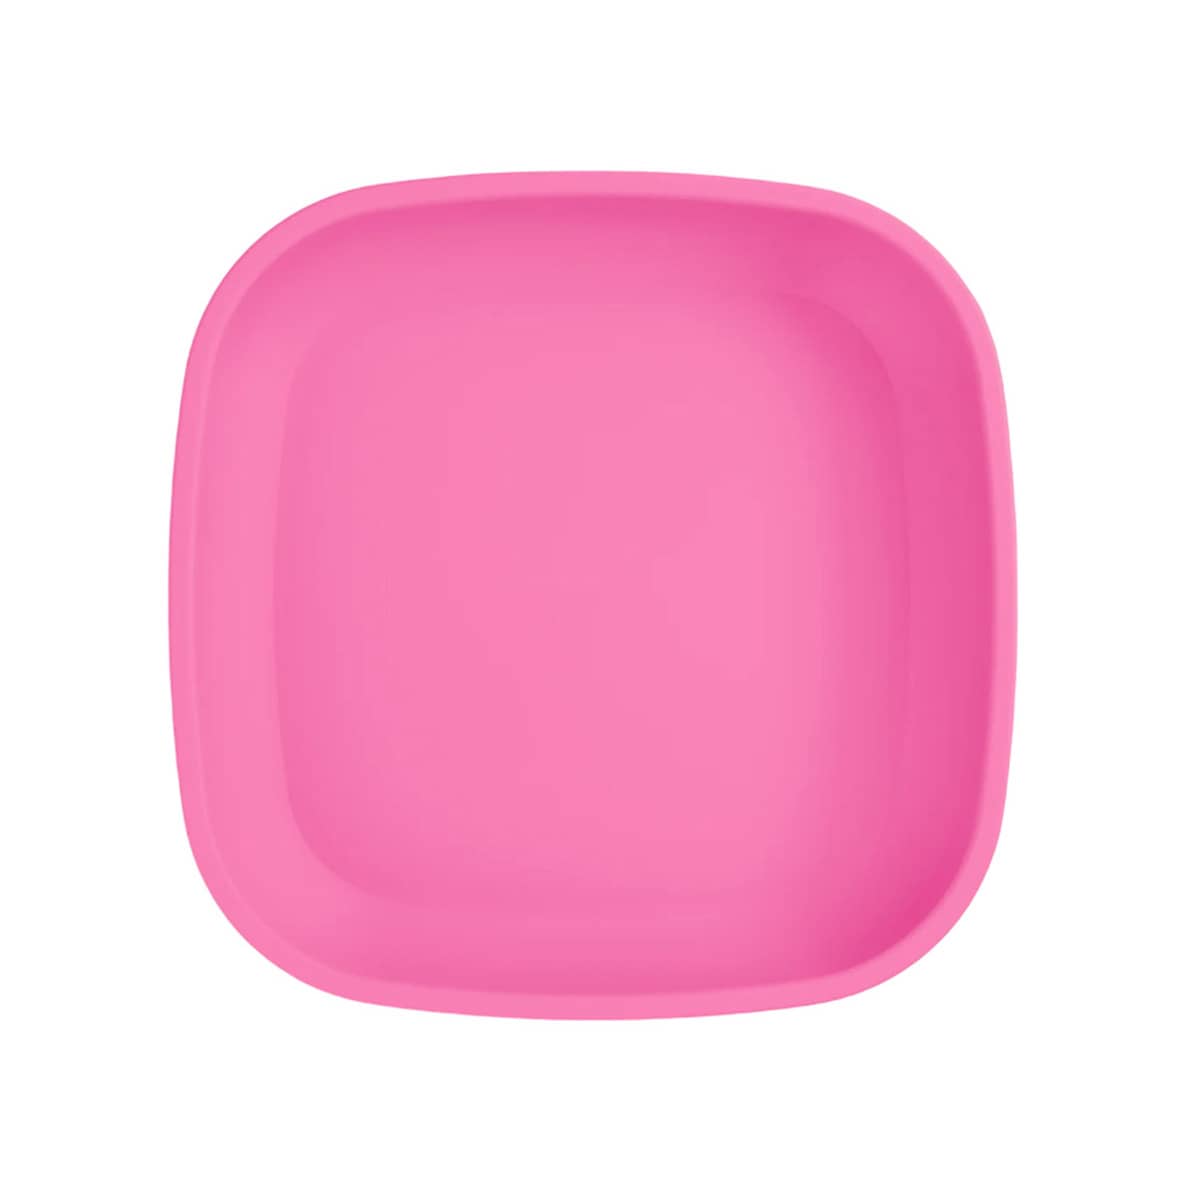 Re-Play Recycled Flat Plate - Bright Pink